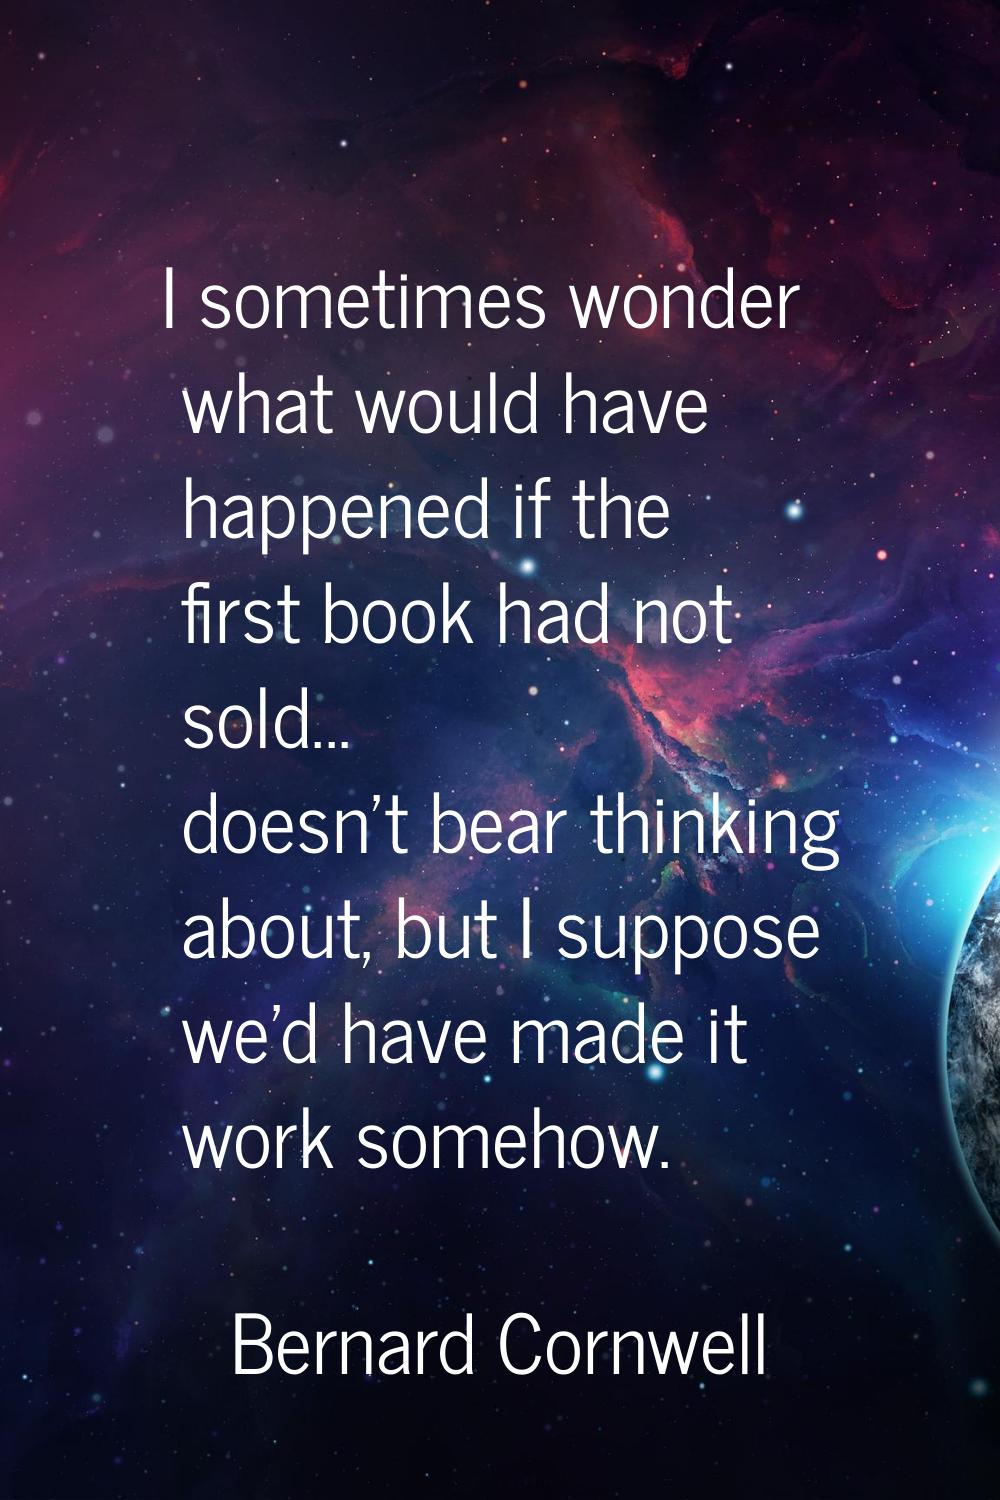 I sometimes wonder what would have happened if the first book had not sold... doesn't bear thinking